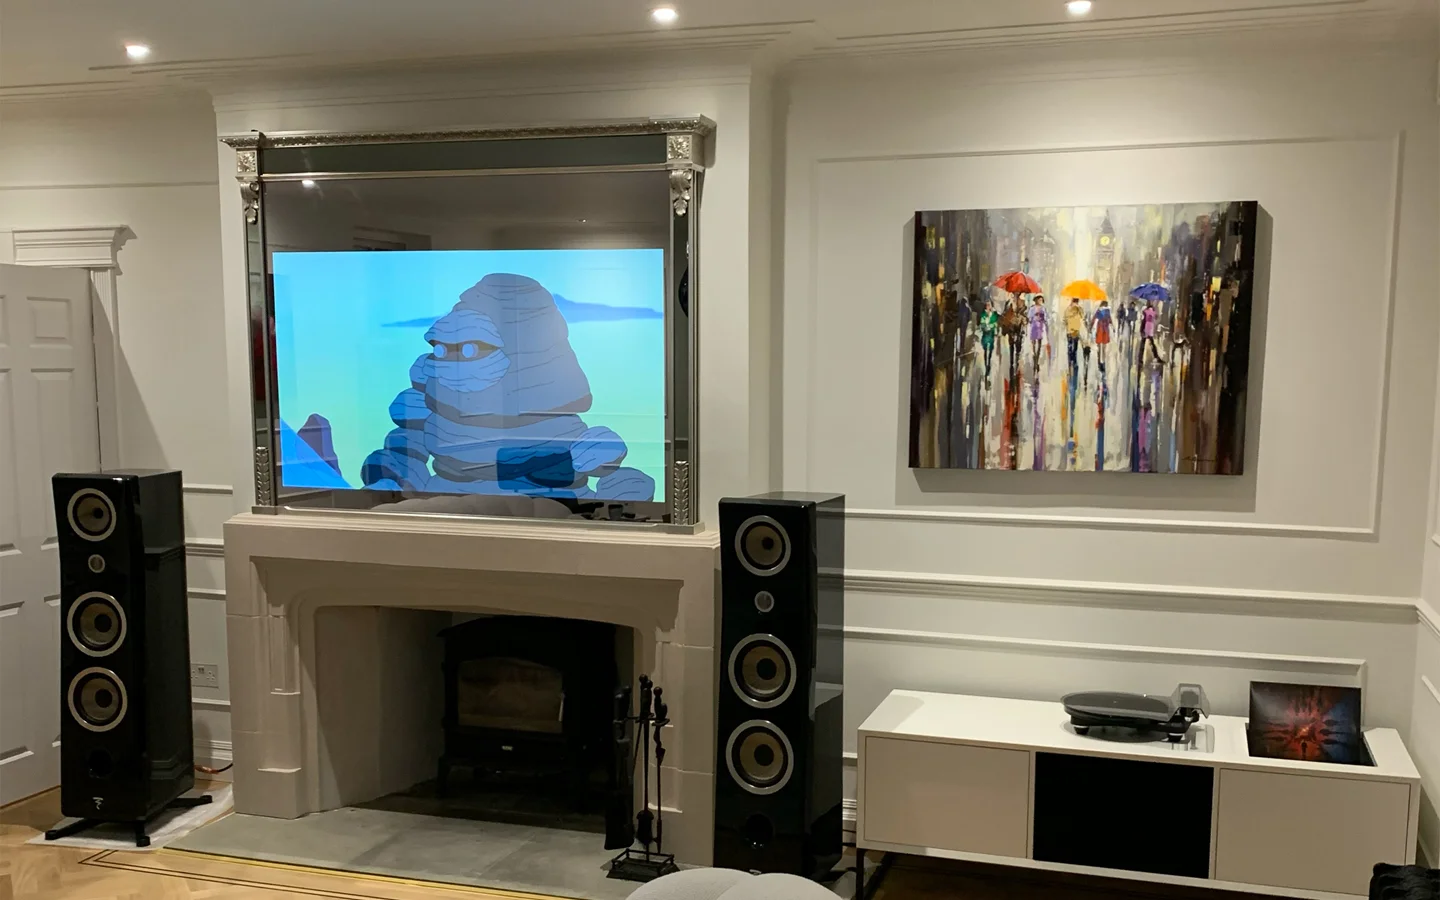 Naim hifi system with TV sound connected to Focal speakers